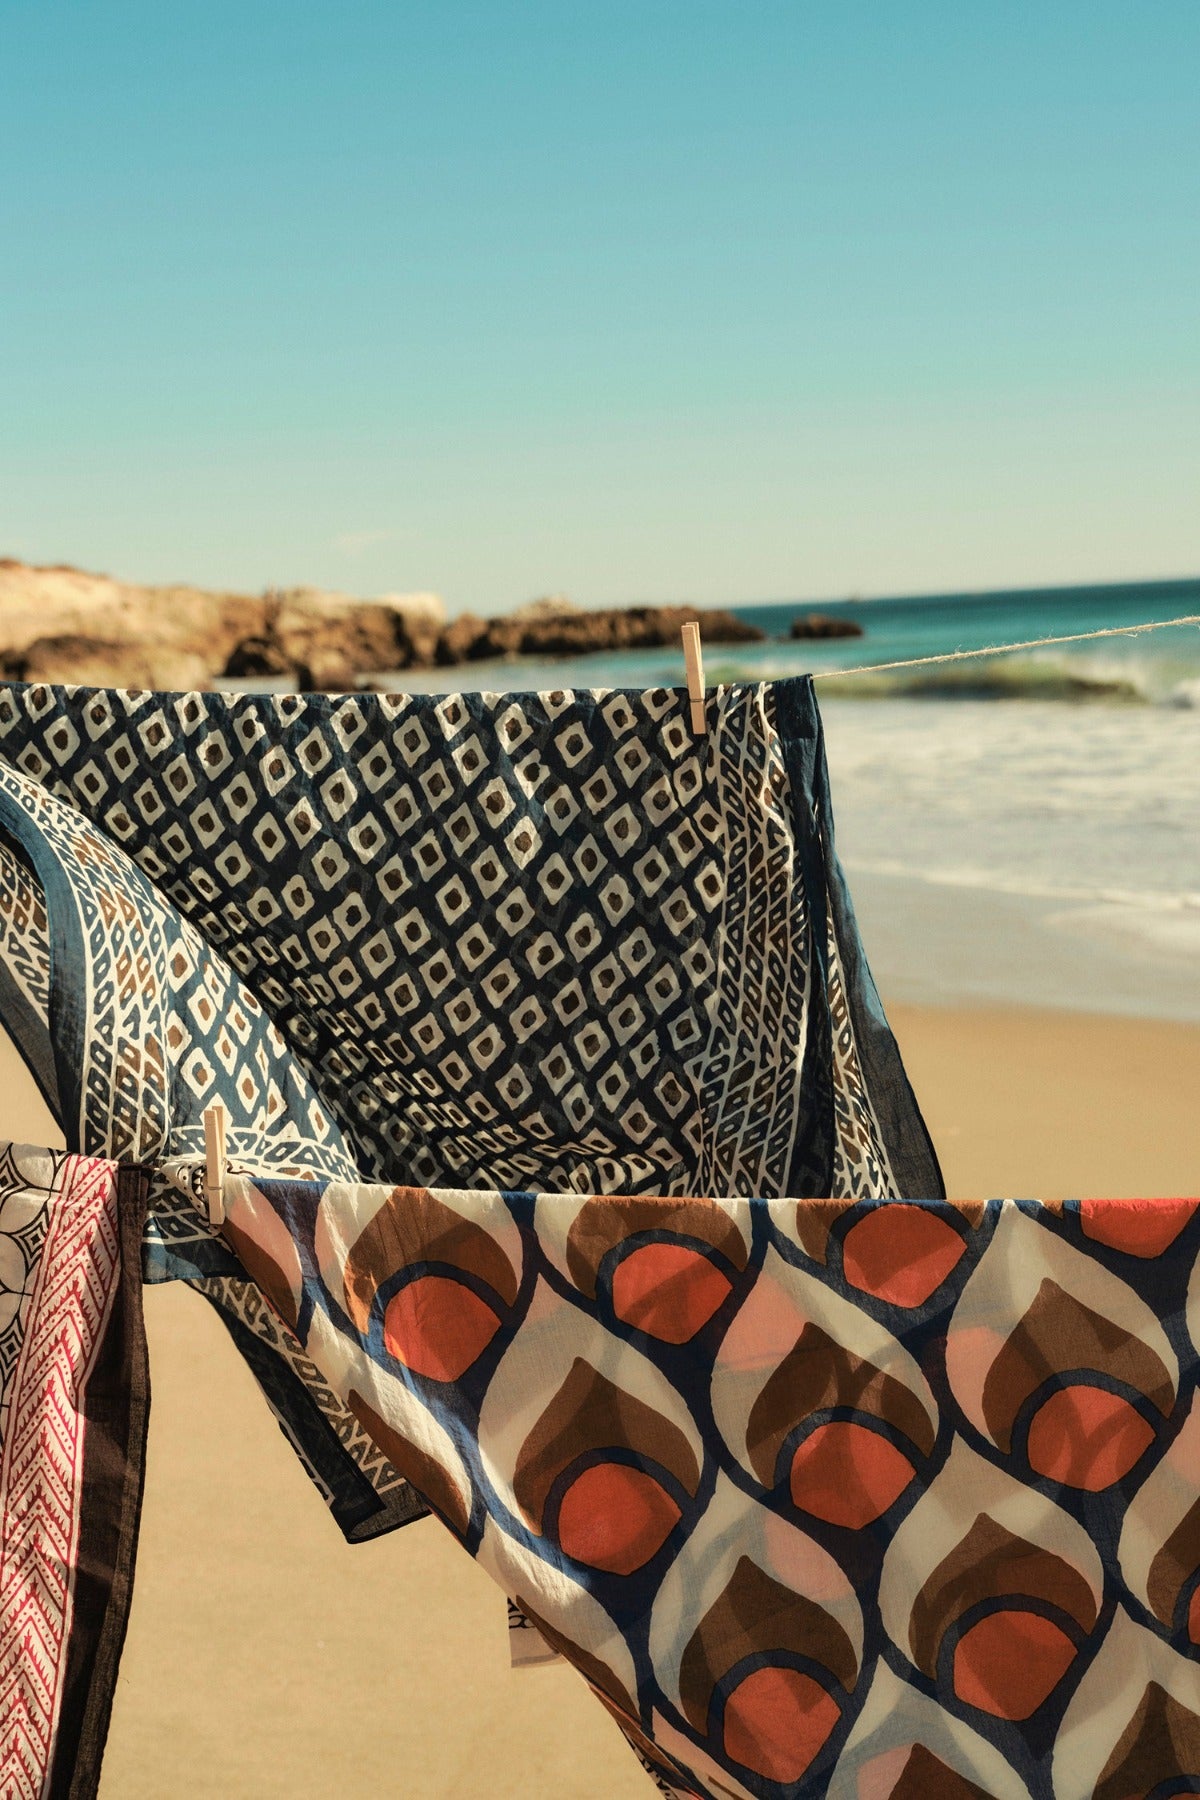   Patterned Velvet by Graham & Spencer SARONG WRAP facing the ocean with waves crashing and rocks in the distance, under a clear blue sky. 